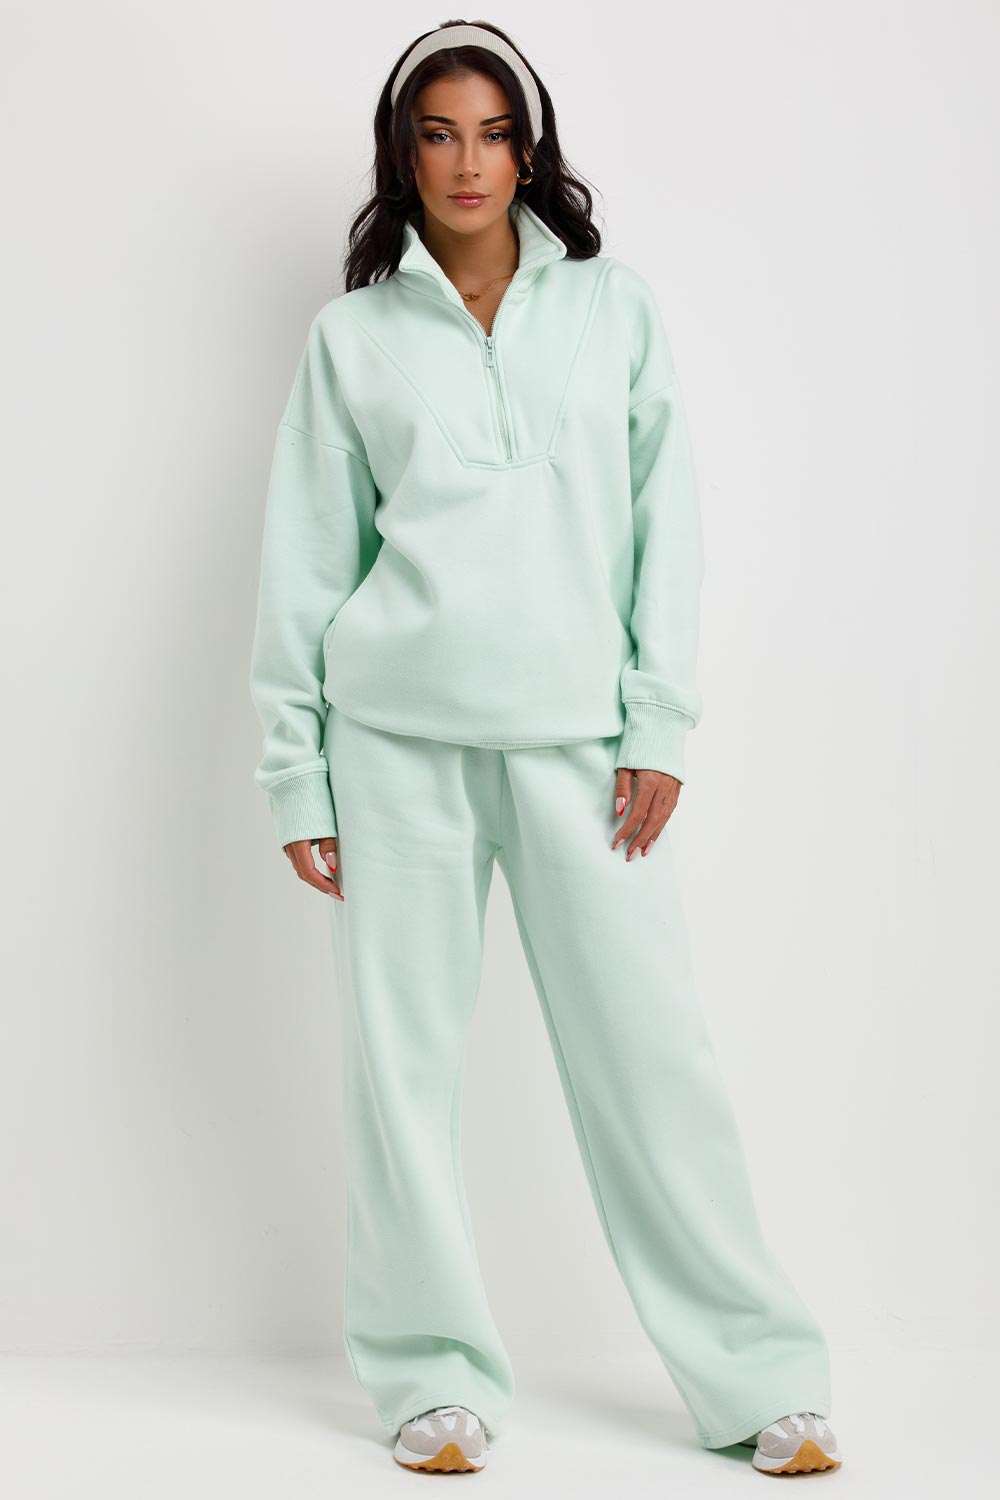 womens half zip jumper and joggers tracksuit loungewear co ord airport outfit